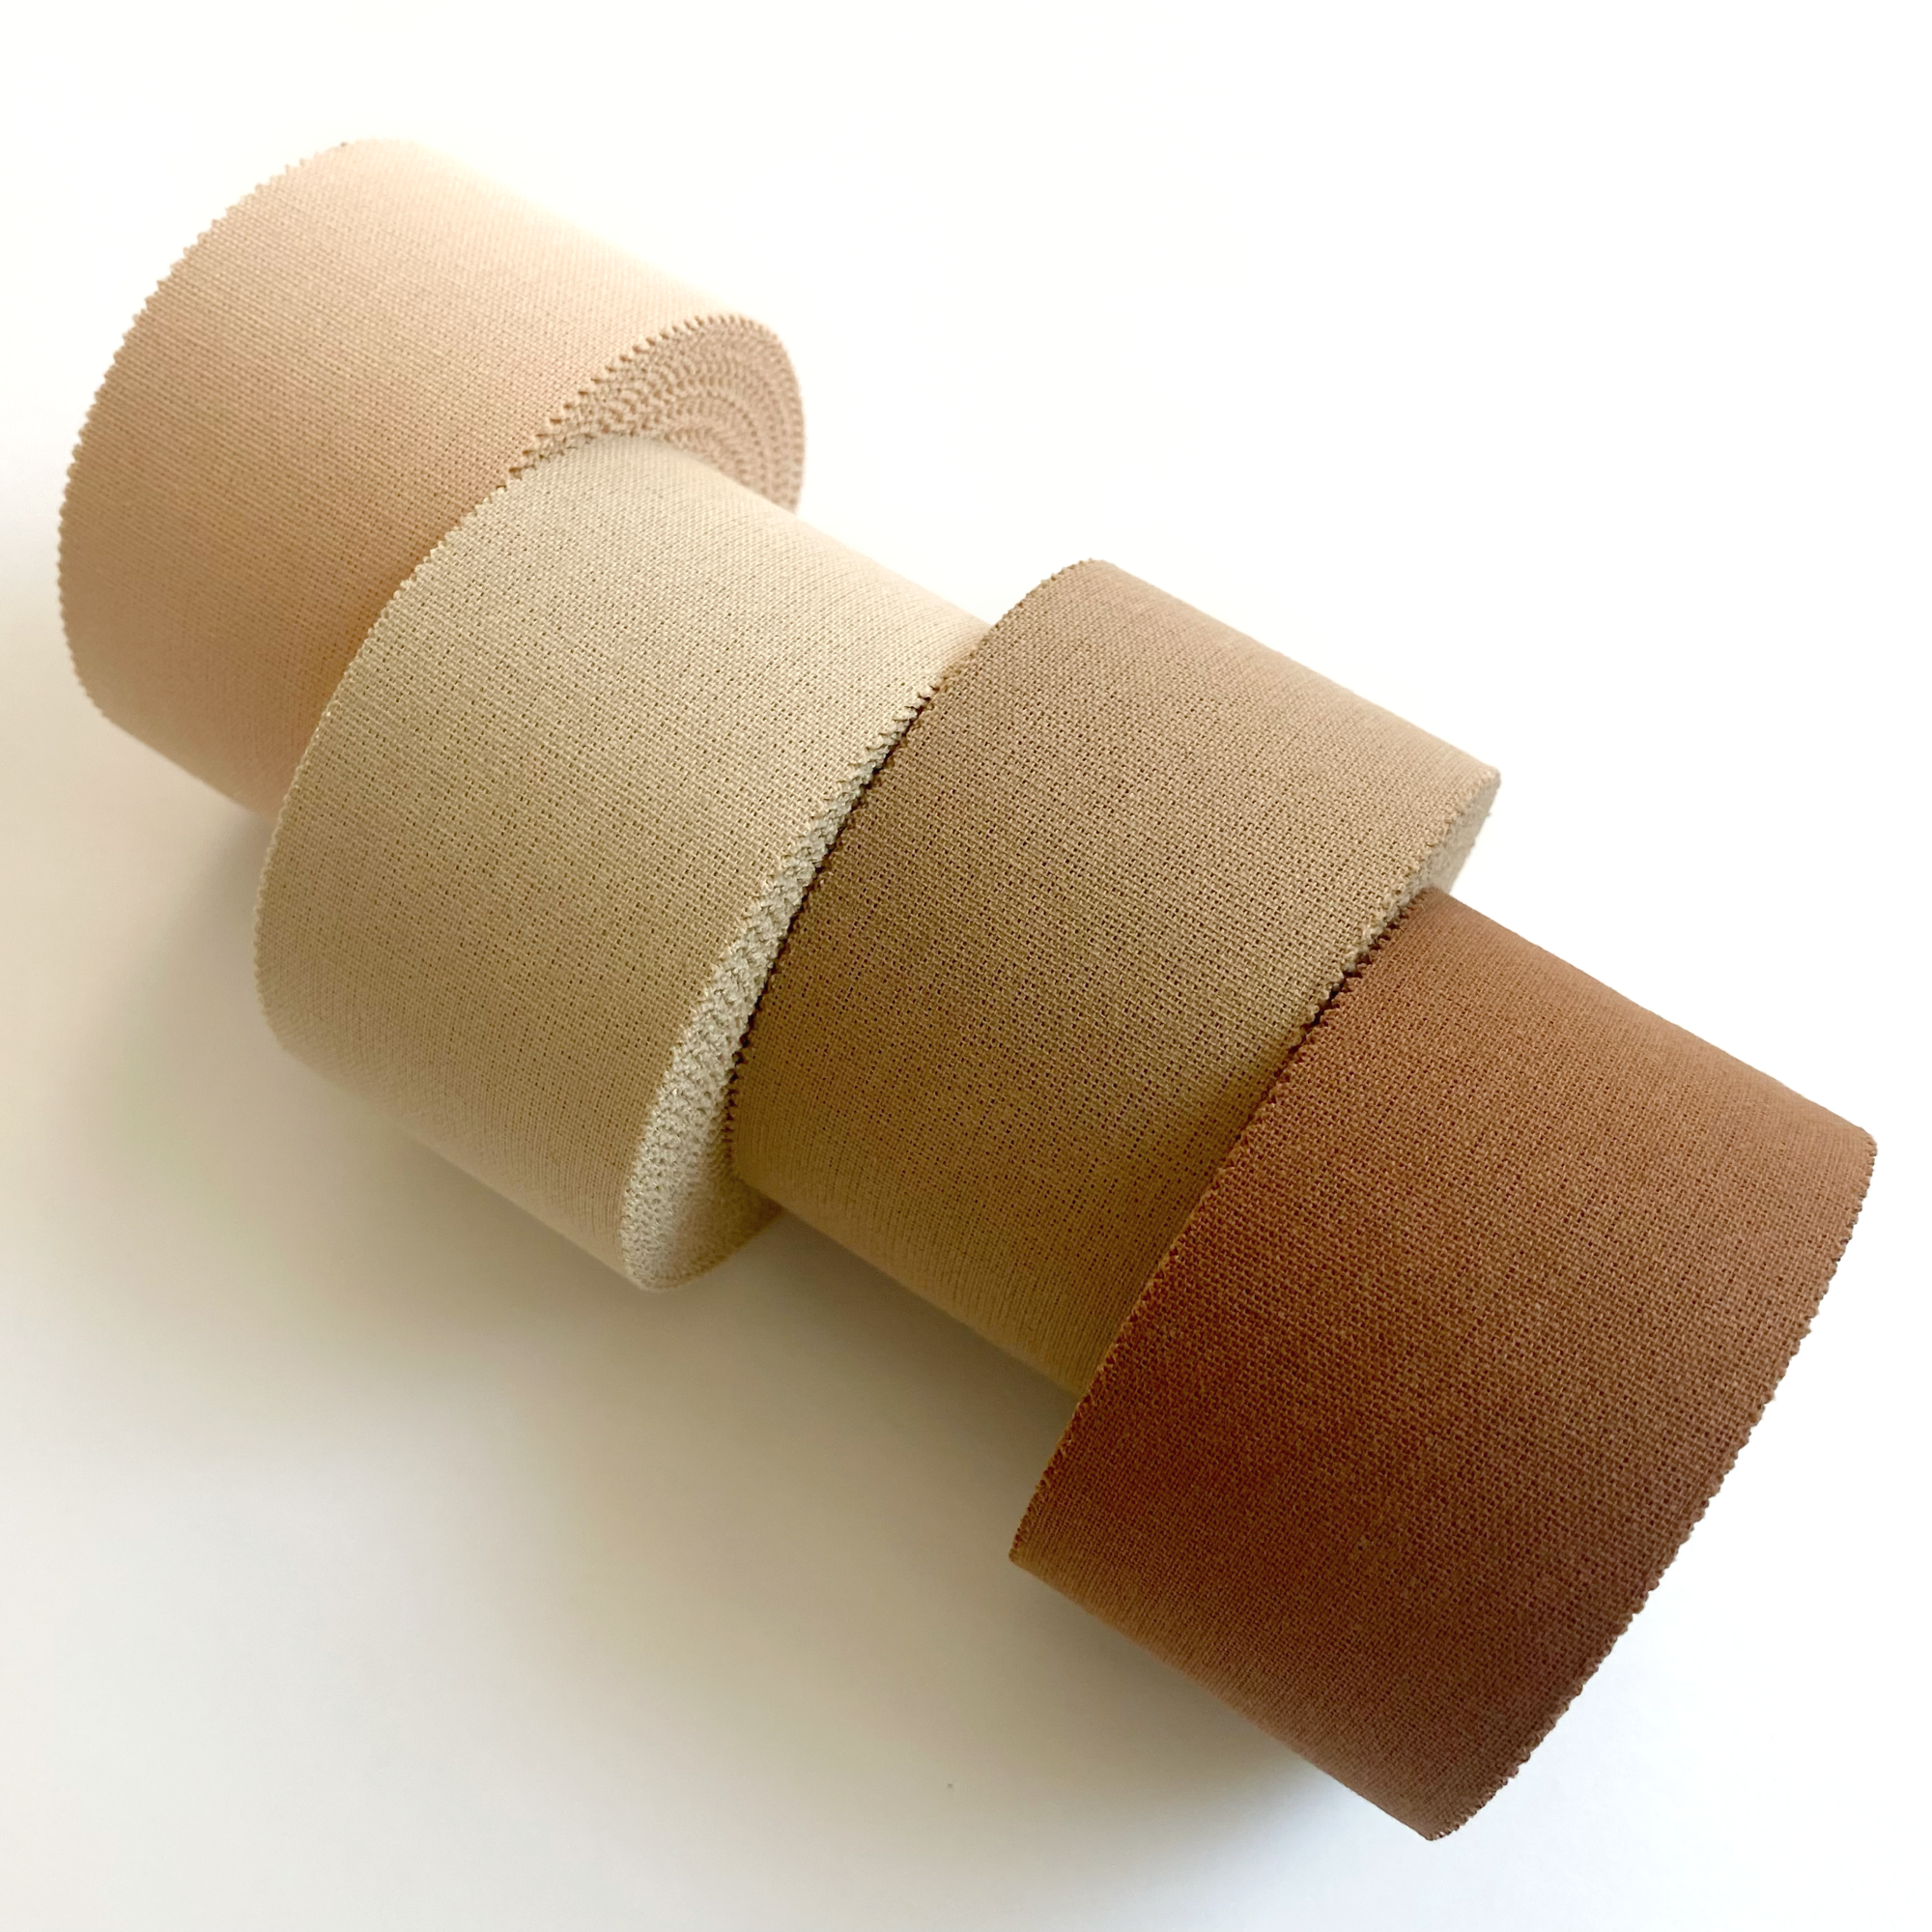 DuoTape Sports Tape From Asher Athletic – Asher Athletic Ltd.